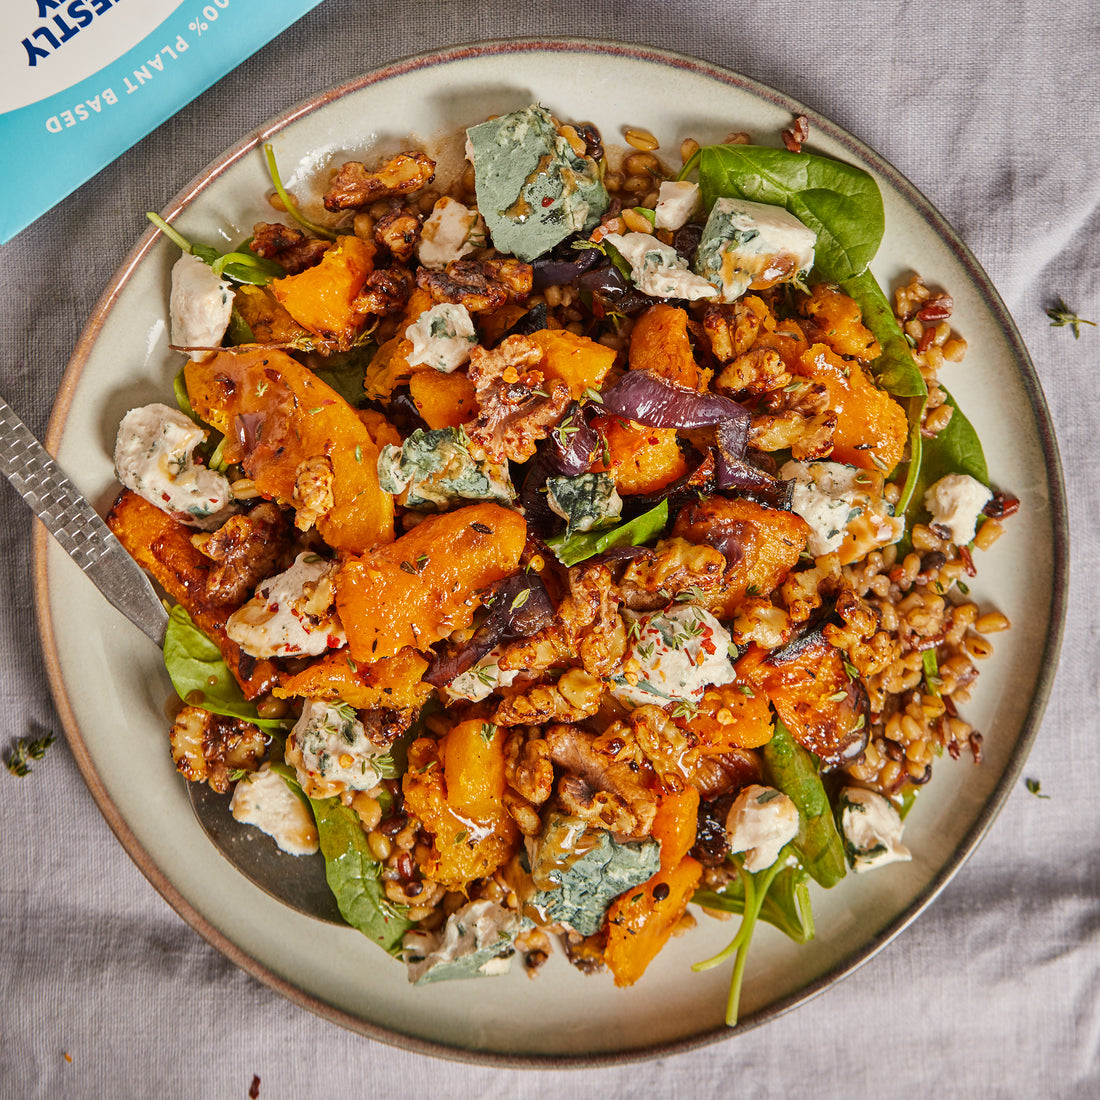 Blue Cheese, Butternut & Barley Salad with Maple Walnuts